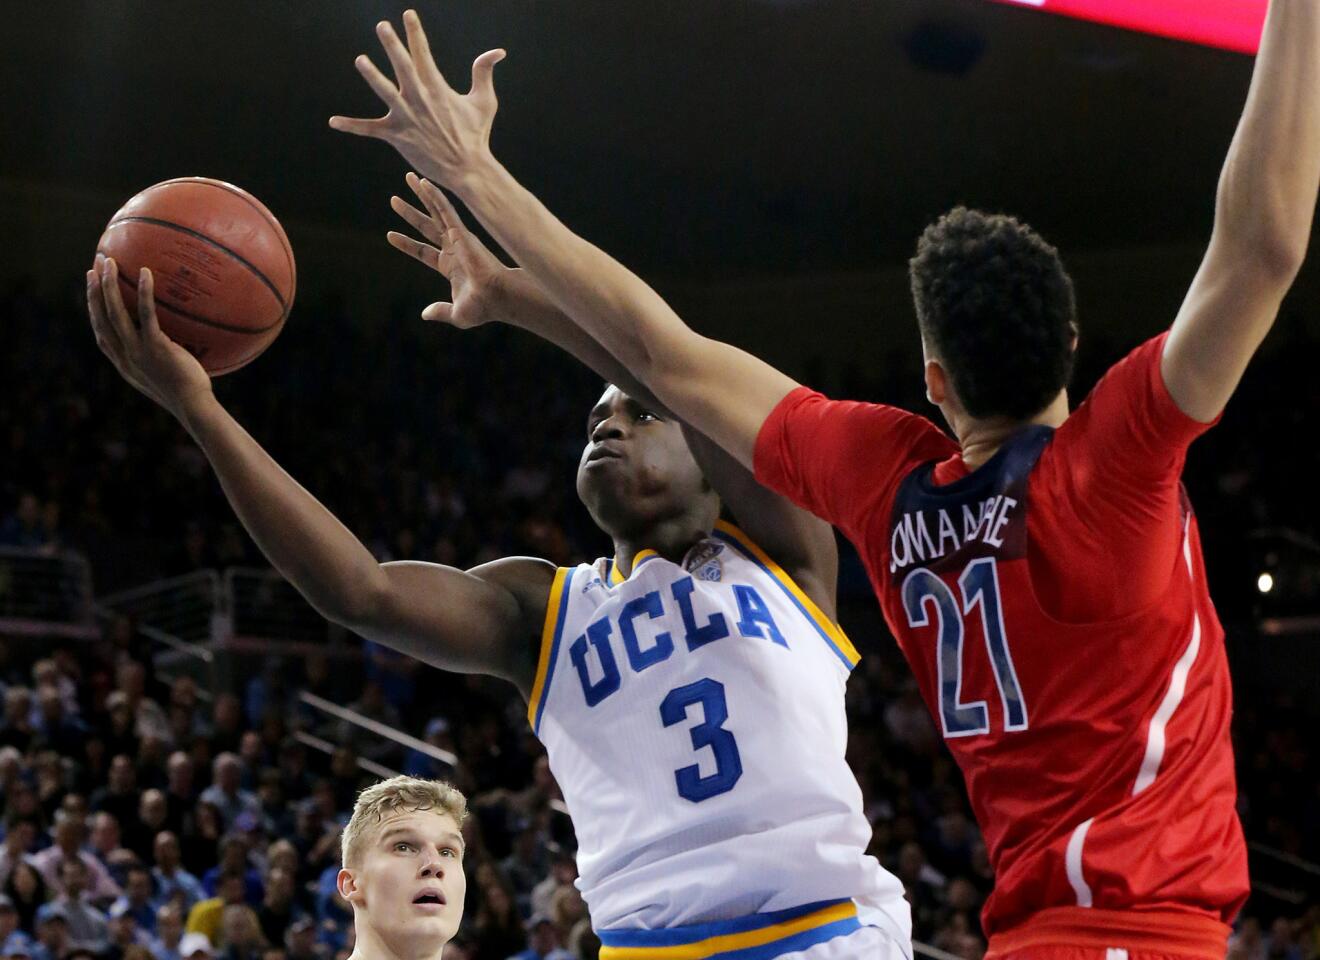 UCLA guard Aaron Holiday drives to the basket against Arizona center Chance Comanche during the second half.